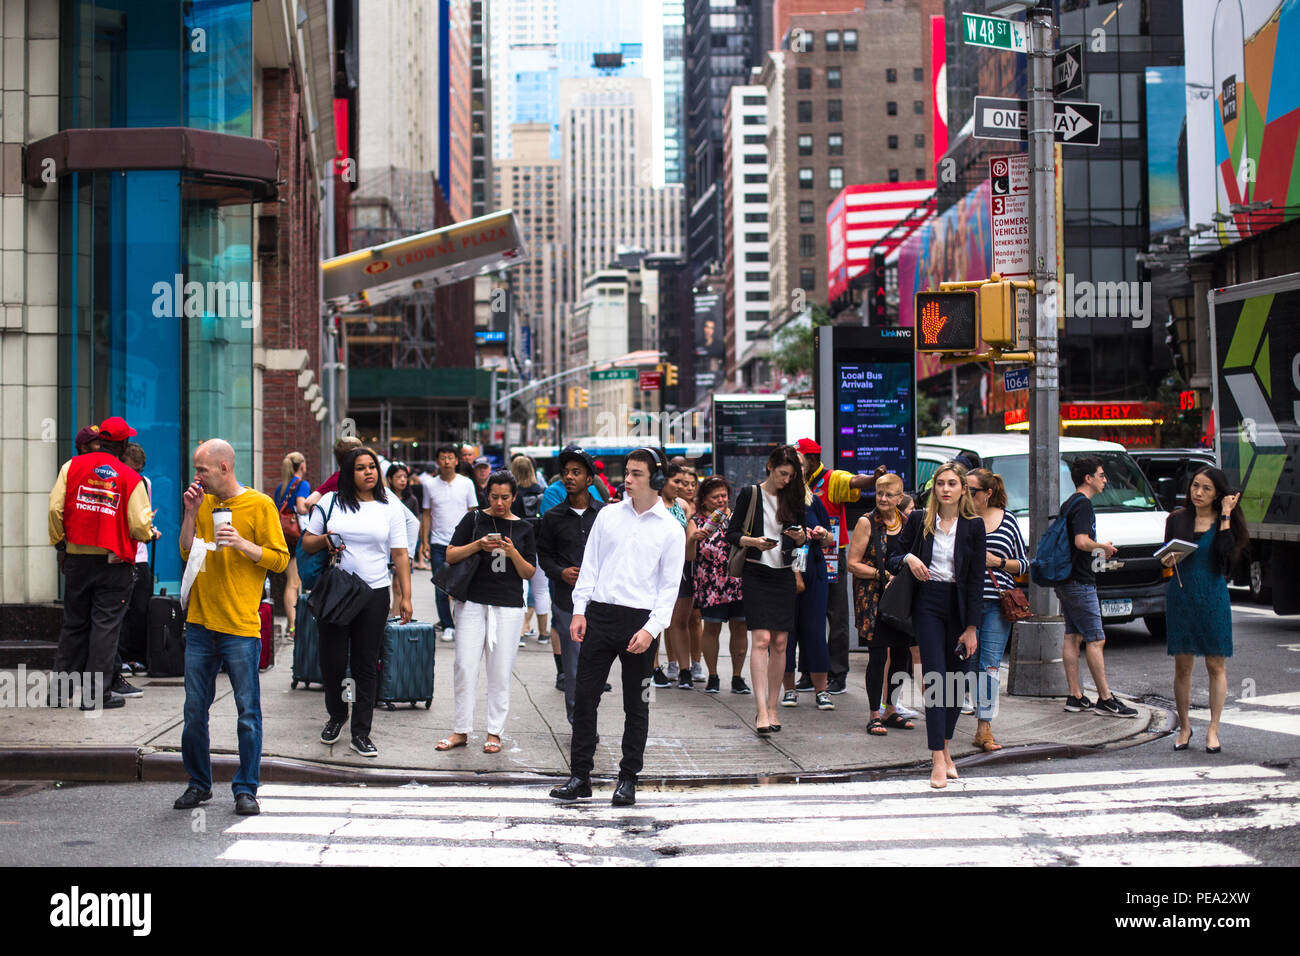 NEW YORK CITY - JULY 26, 2018: Busy sidewalk in Times Square in Manhattan crowded with many people walking and billboards. Stock Photo